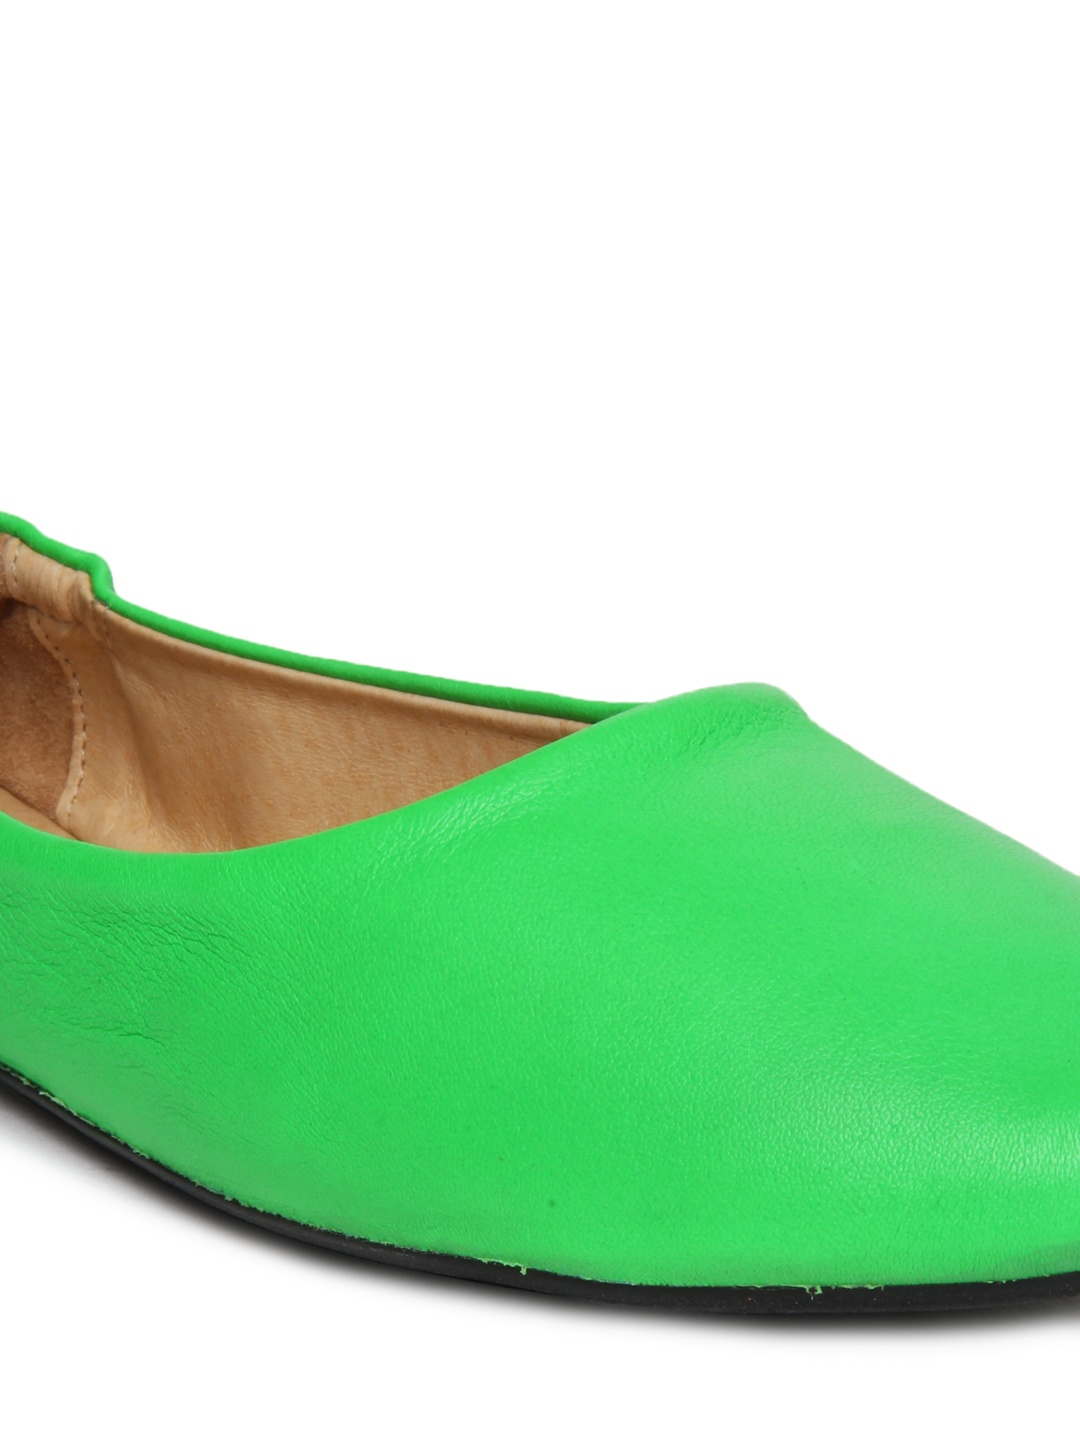 ... Details More Flats by Carlton London More Green Flats More Flats